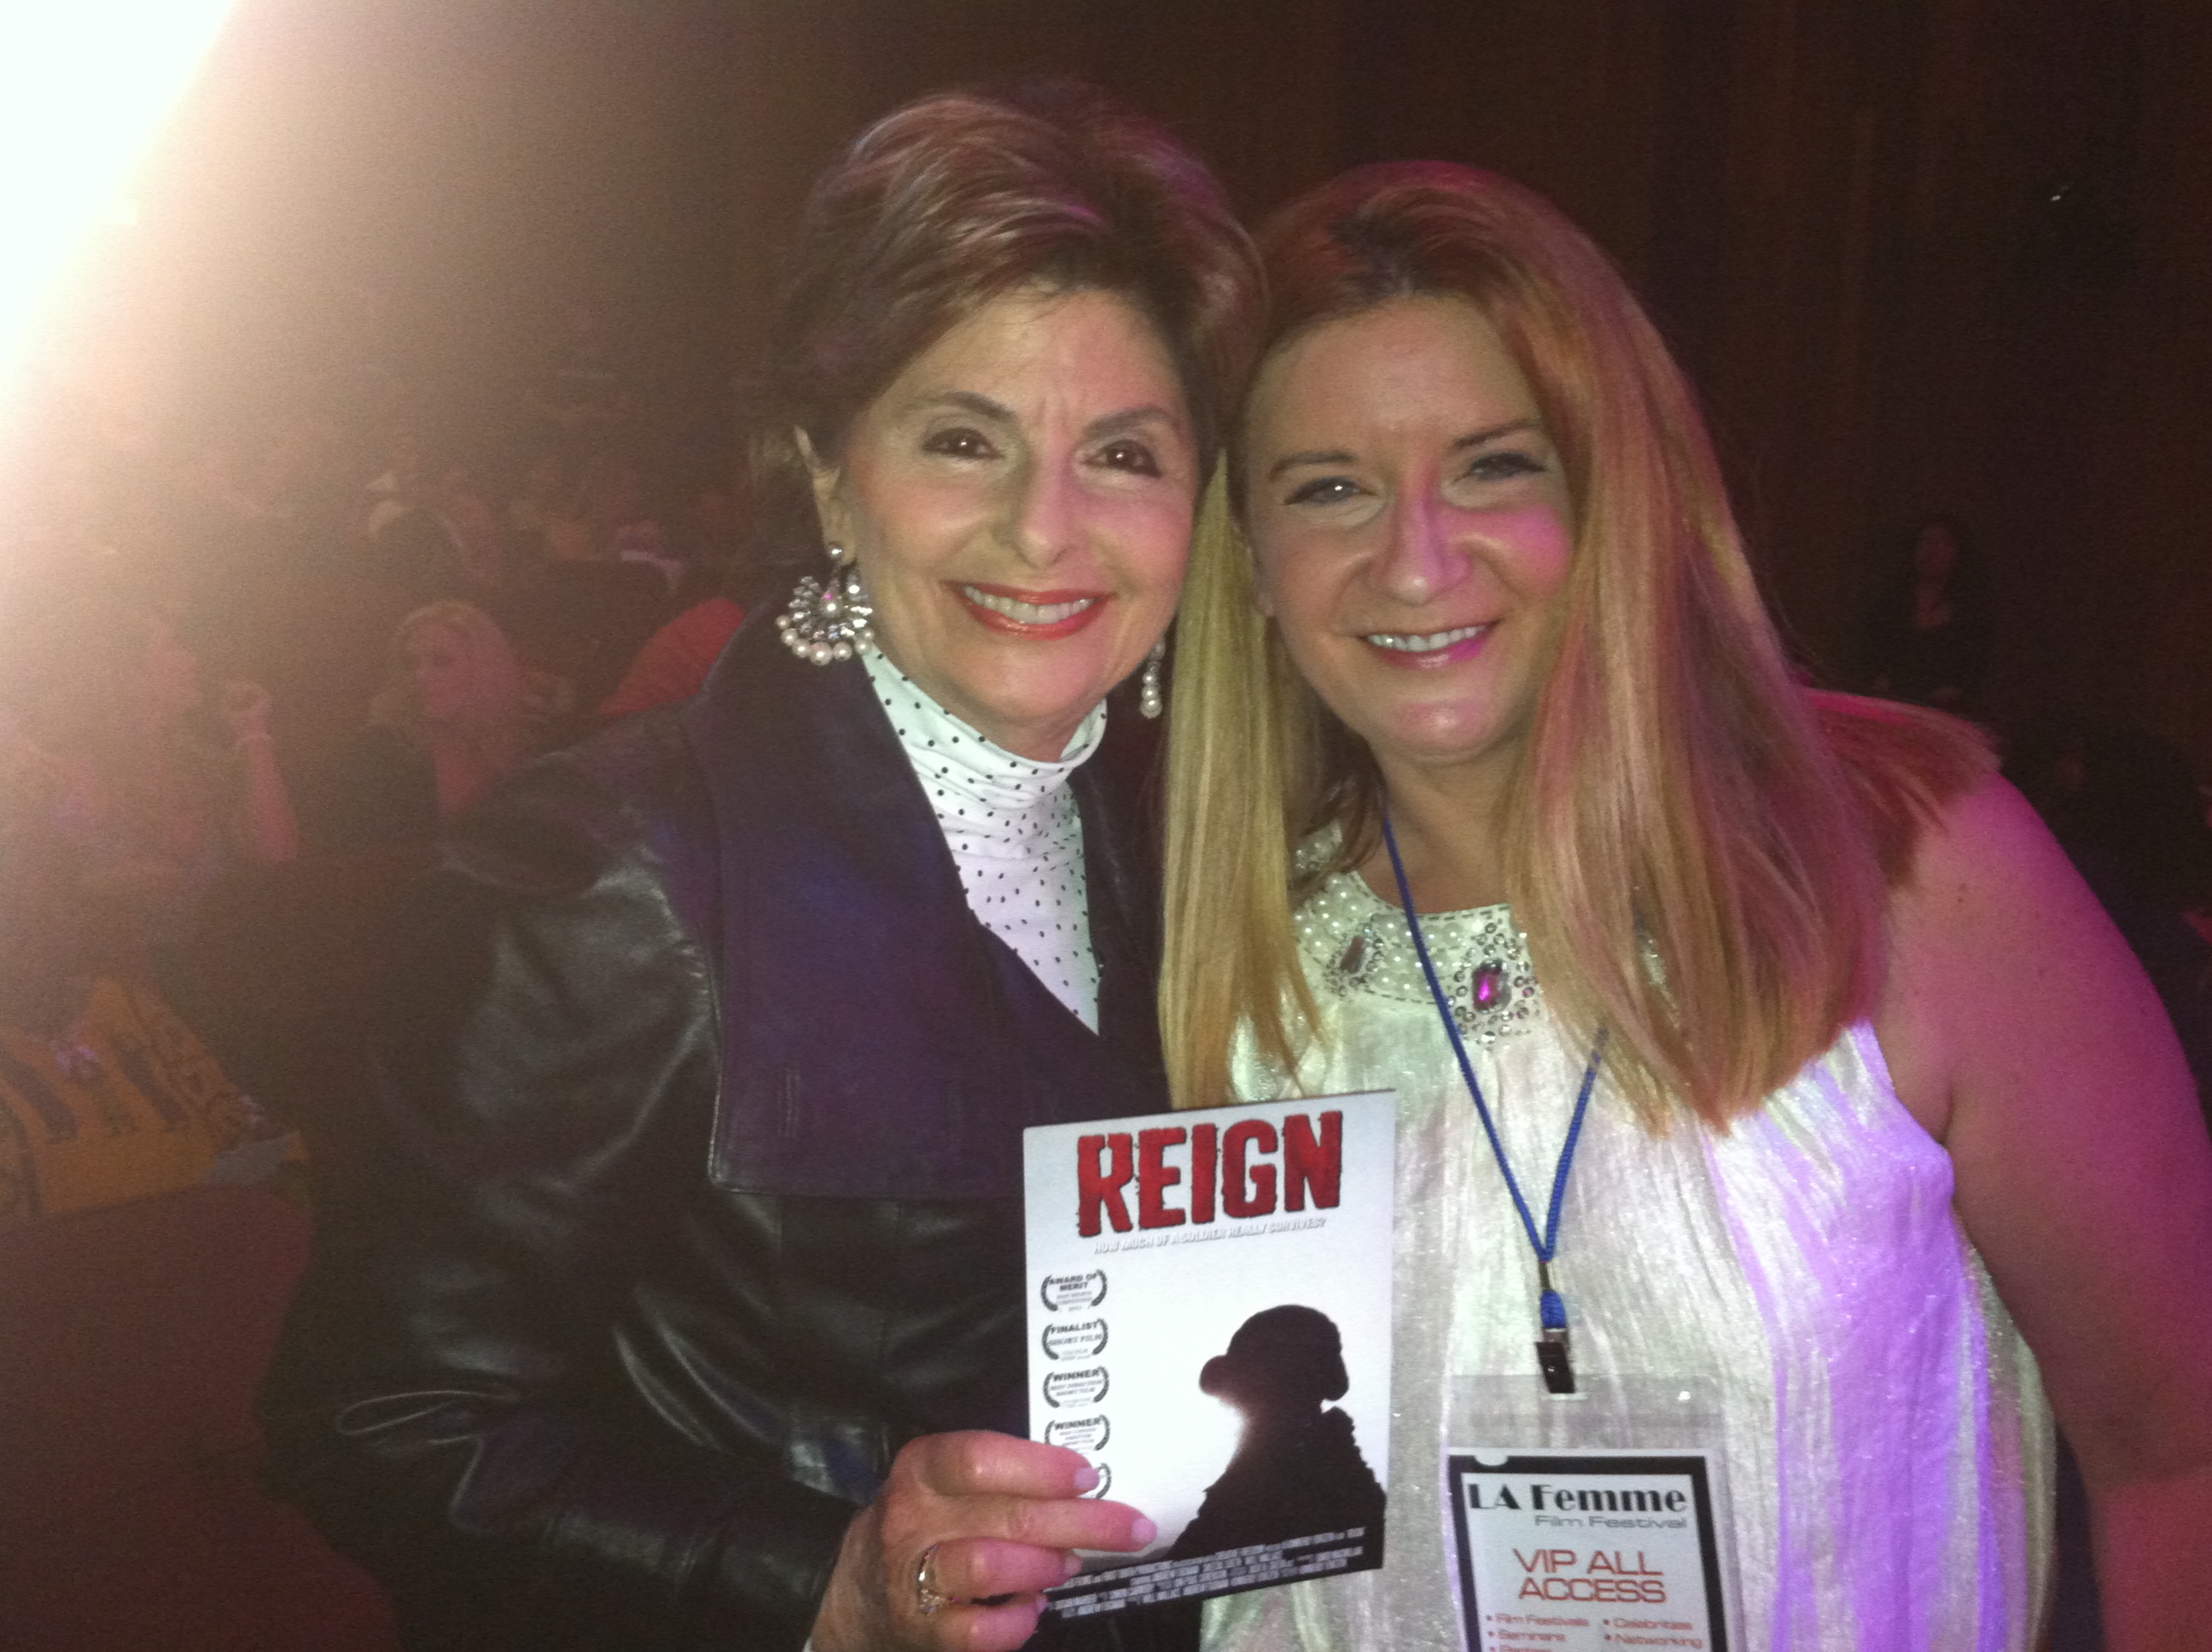 Gloria Allred and Producer/Actress/Writer Peggy Lane at the LA Femme Festival in Los Angeles